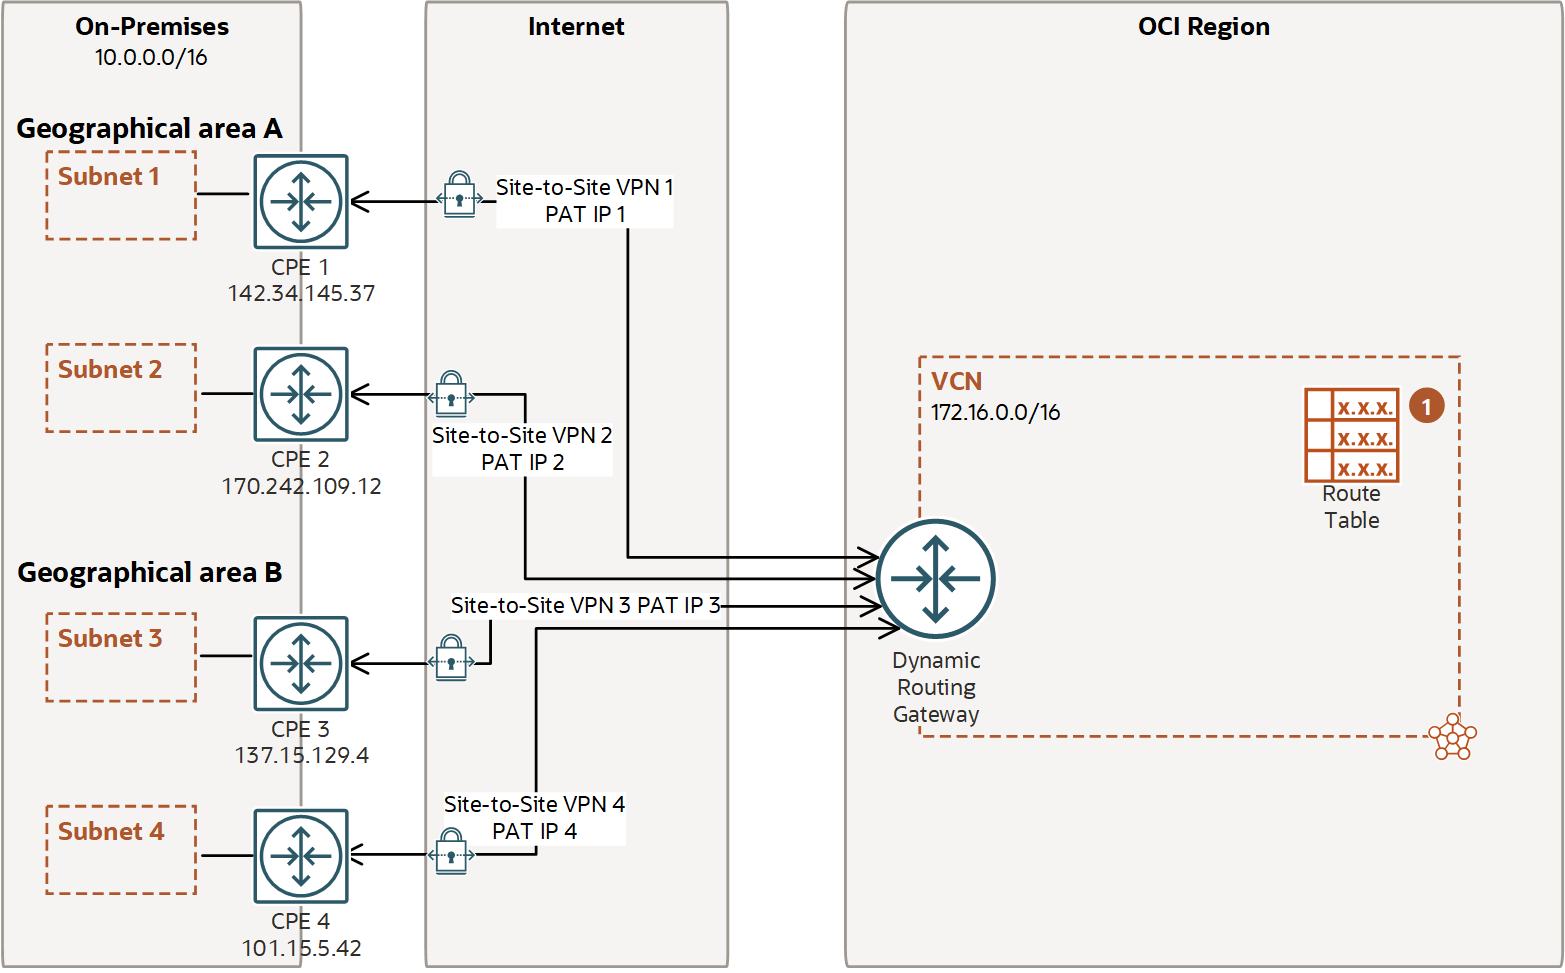 This image shows a scenario with multiple IPSec VPNs, routers, and PAT